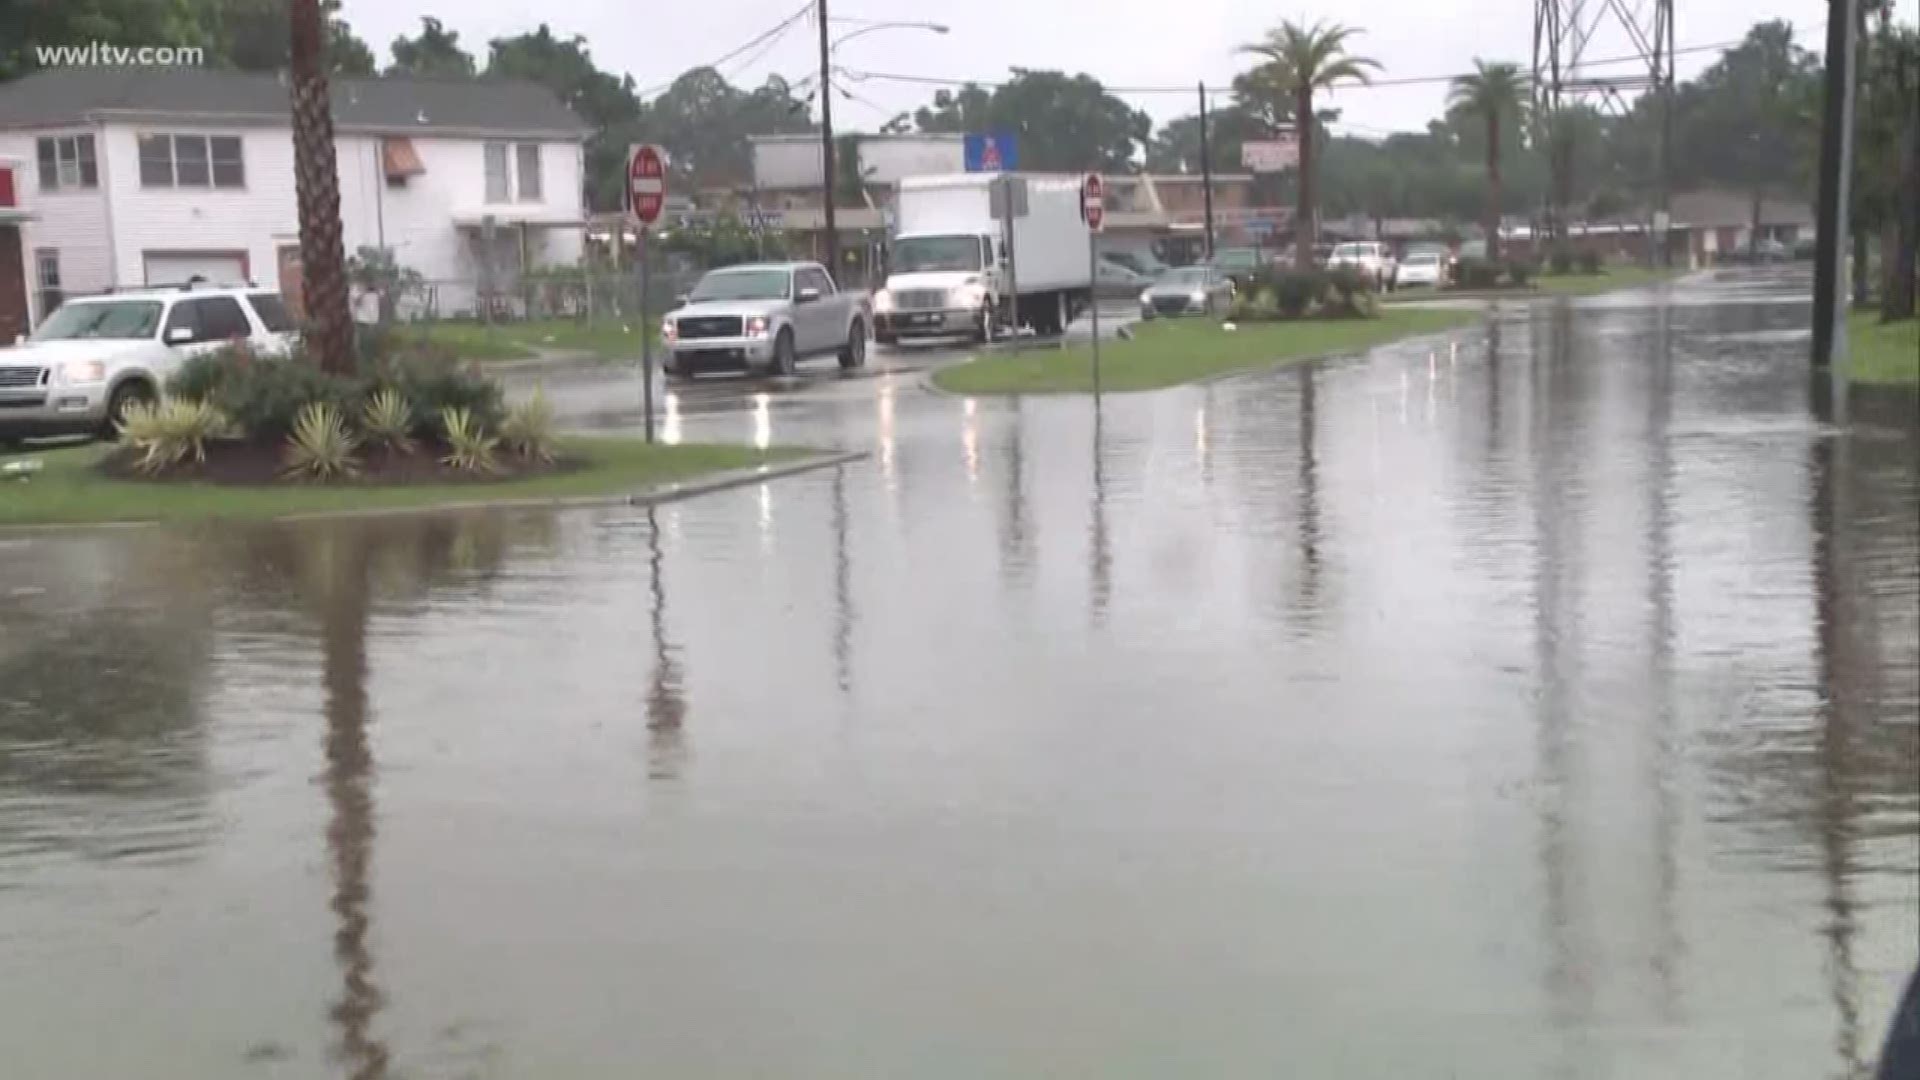 Flooding reported in parts of Gretna